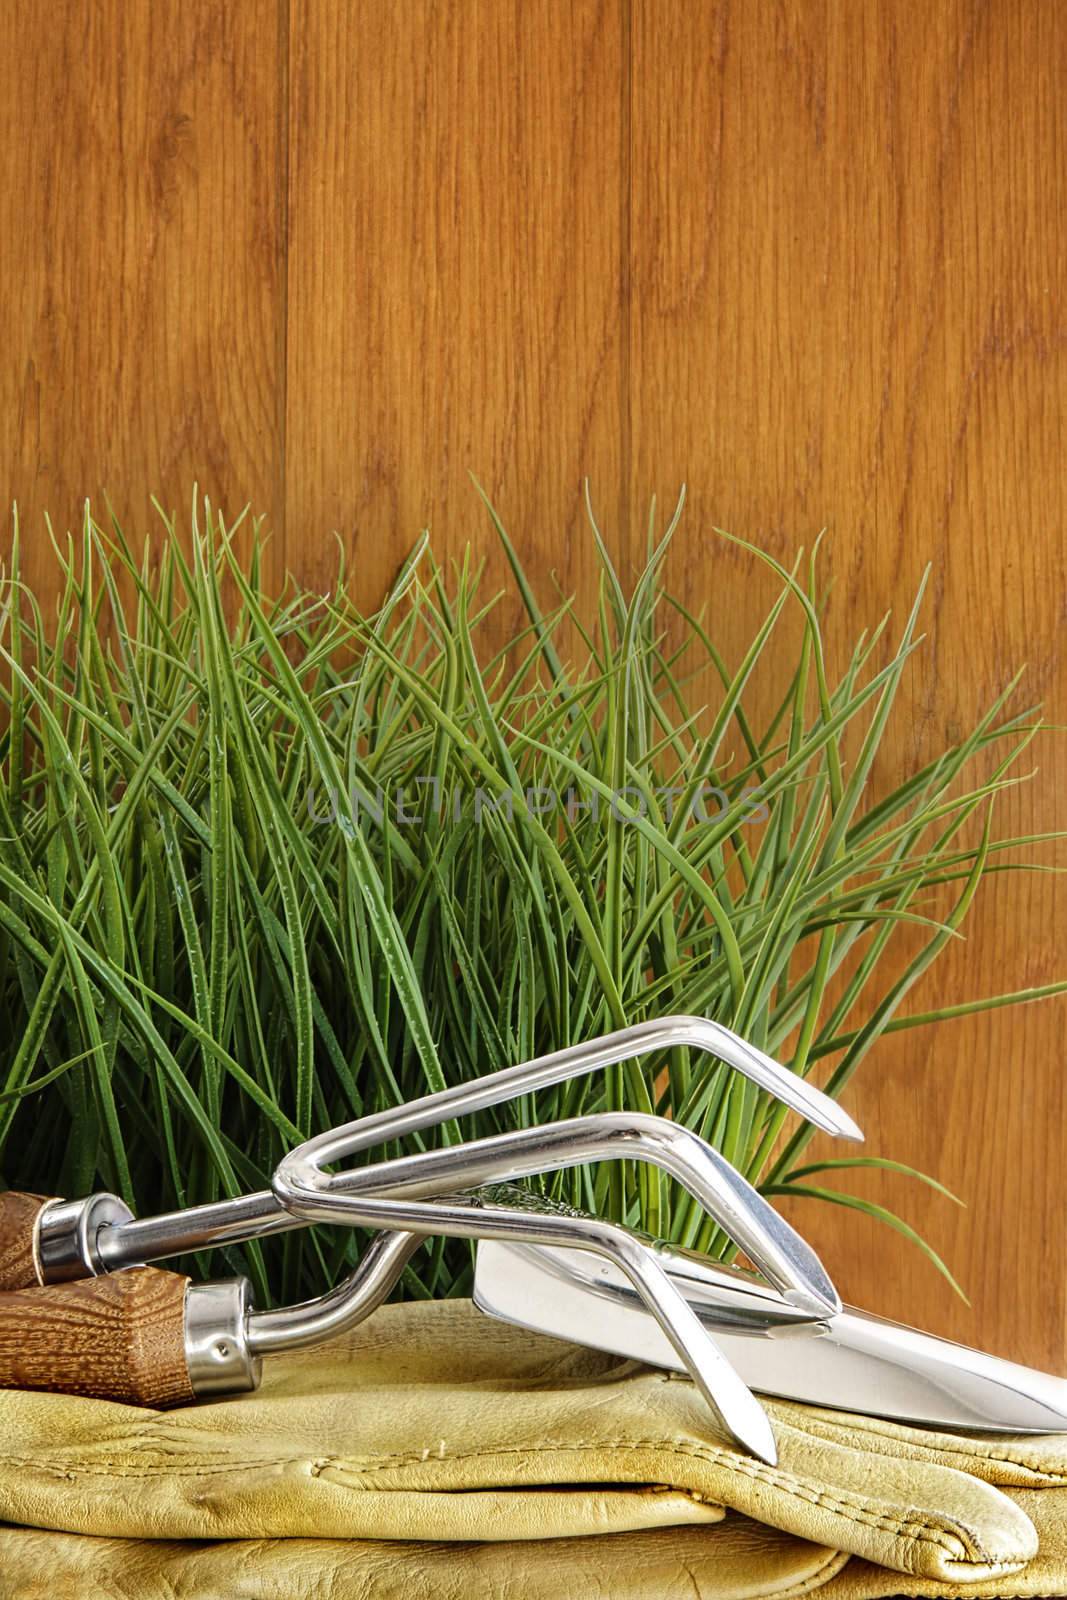 Garden tools with grass on wood background by Sandralise